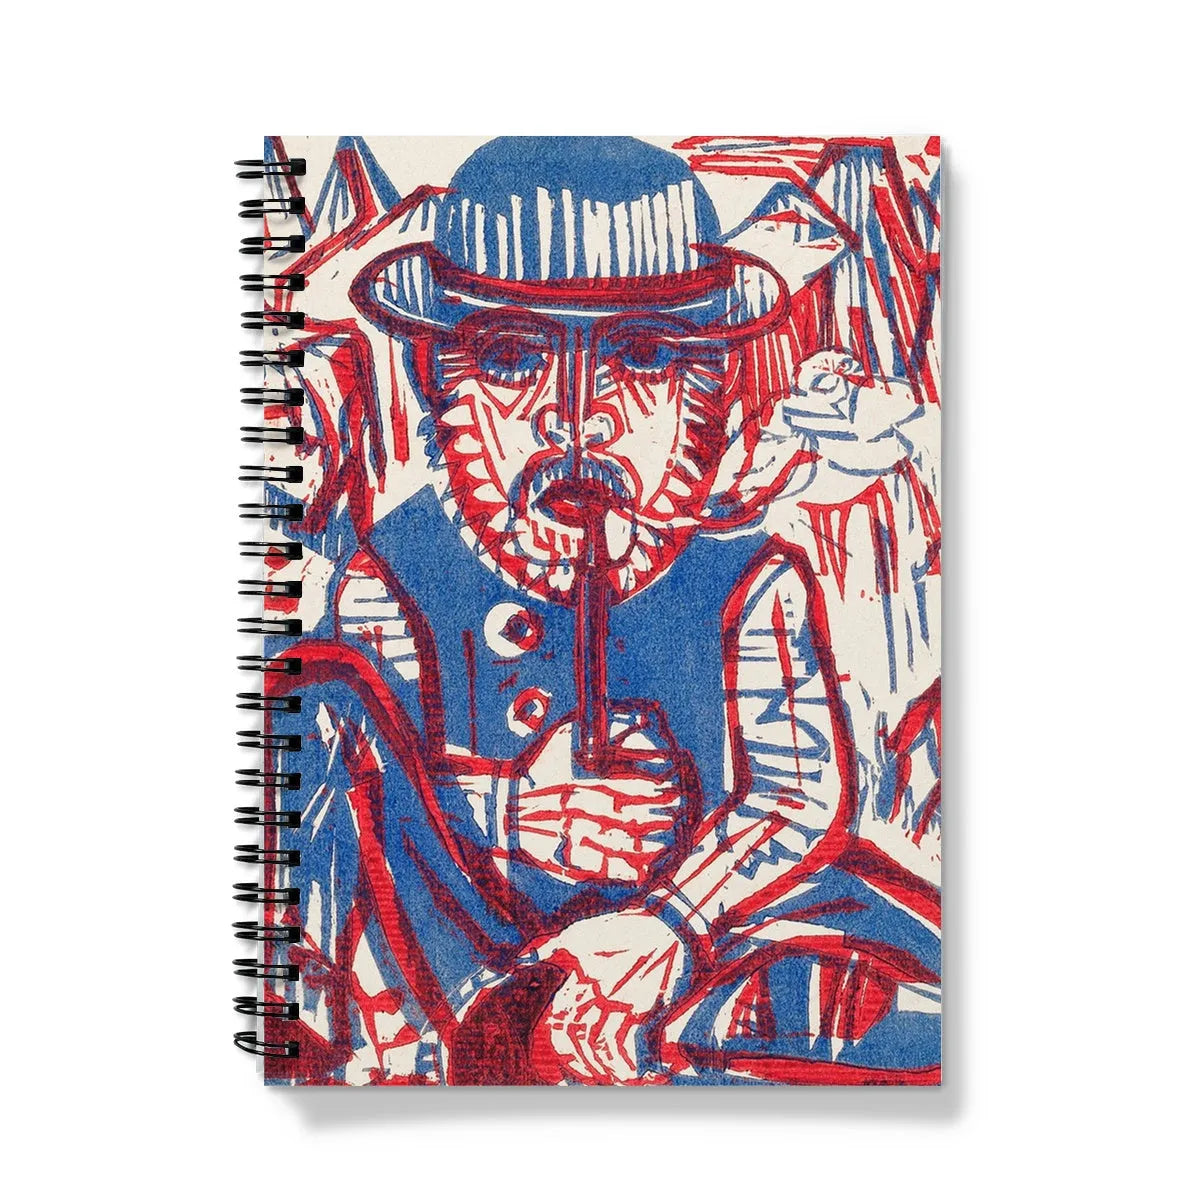 Smoking Peasant By Ernst Ludwig Kirchner Notebook - A5 / Graph - Notebooks & Notepads - Aesthetic Art